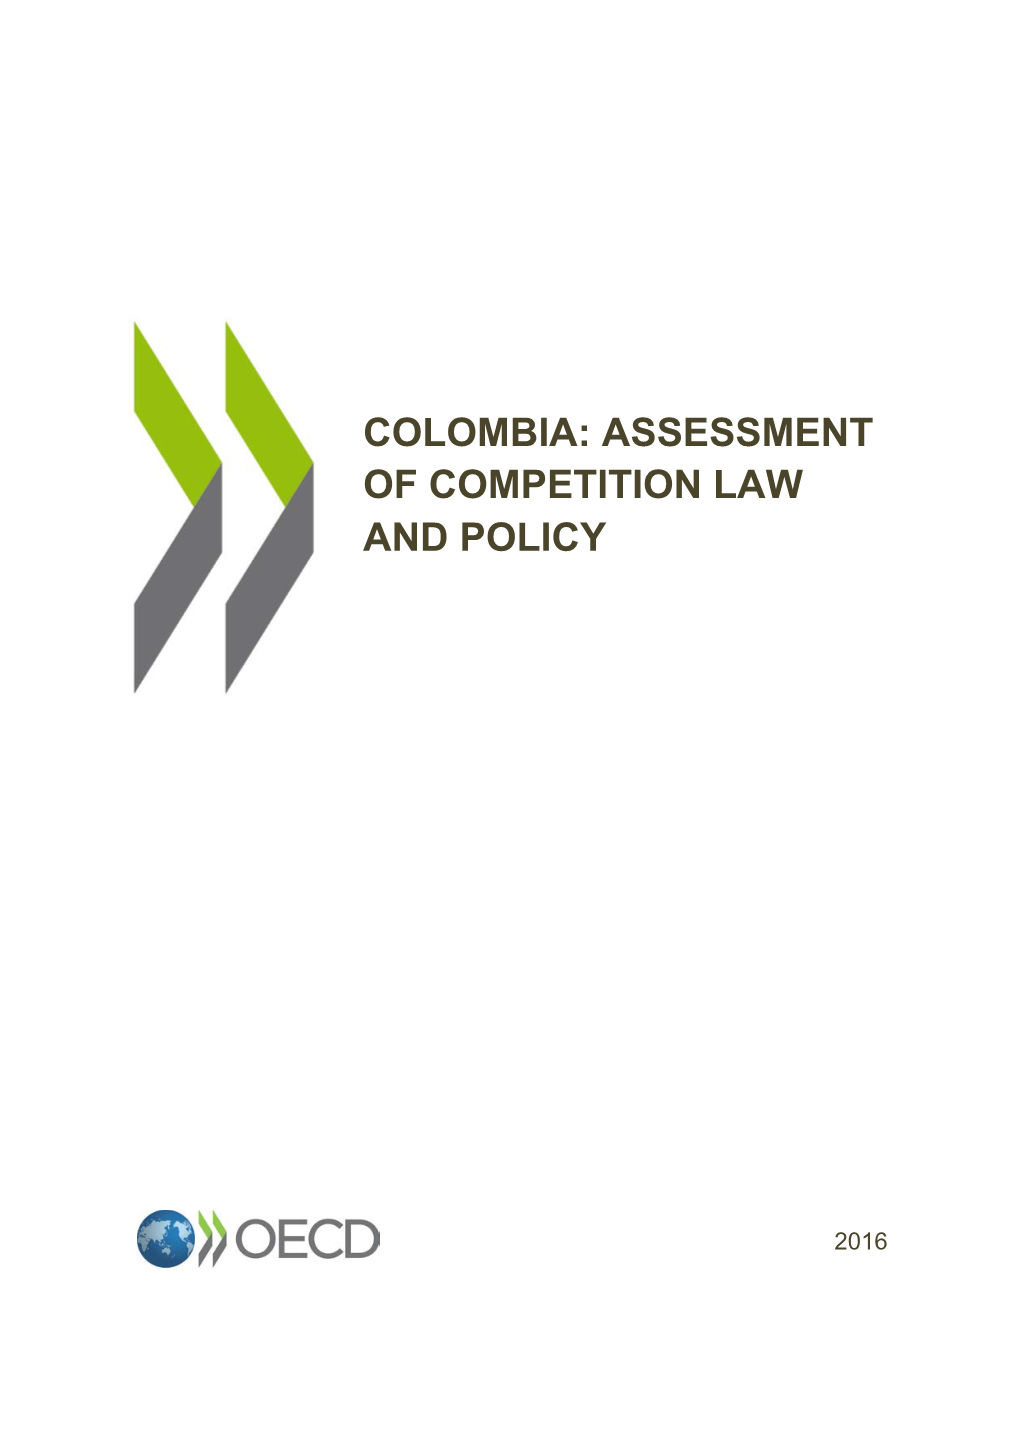 Colombia: Assessment of Competition Law and Policy